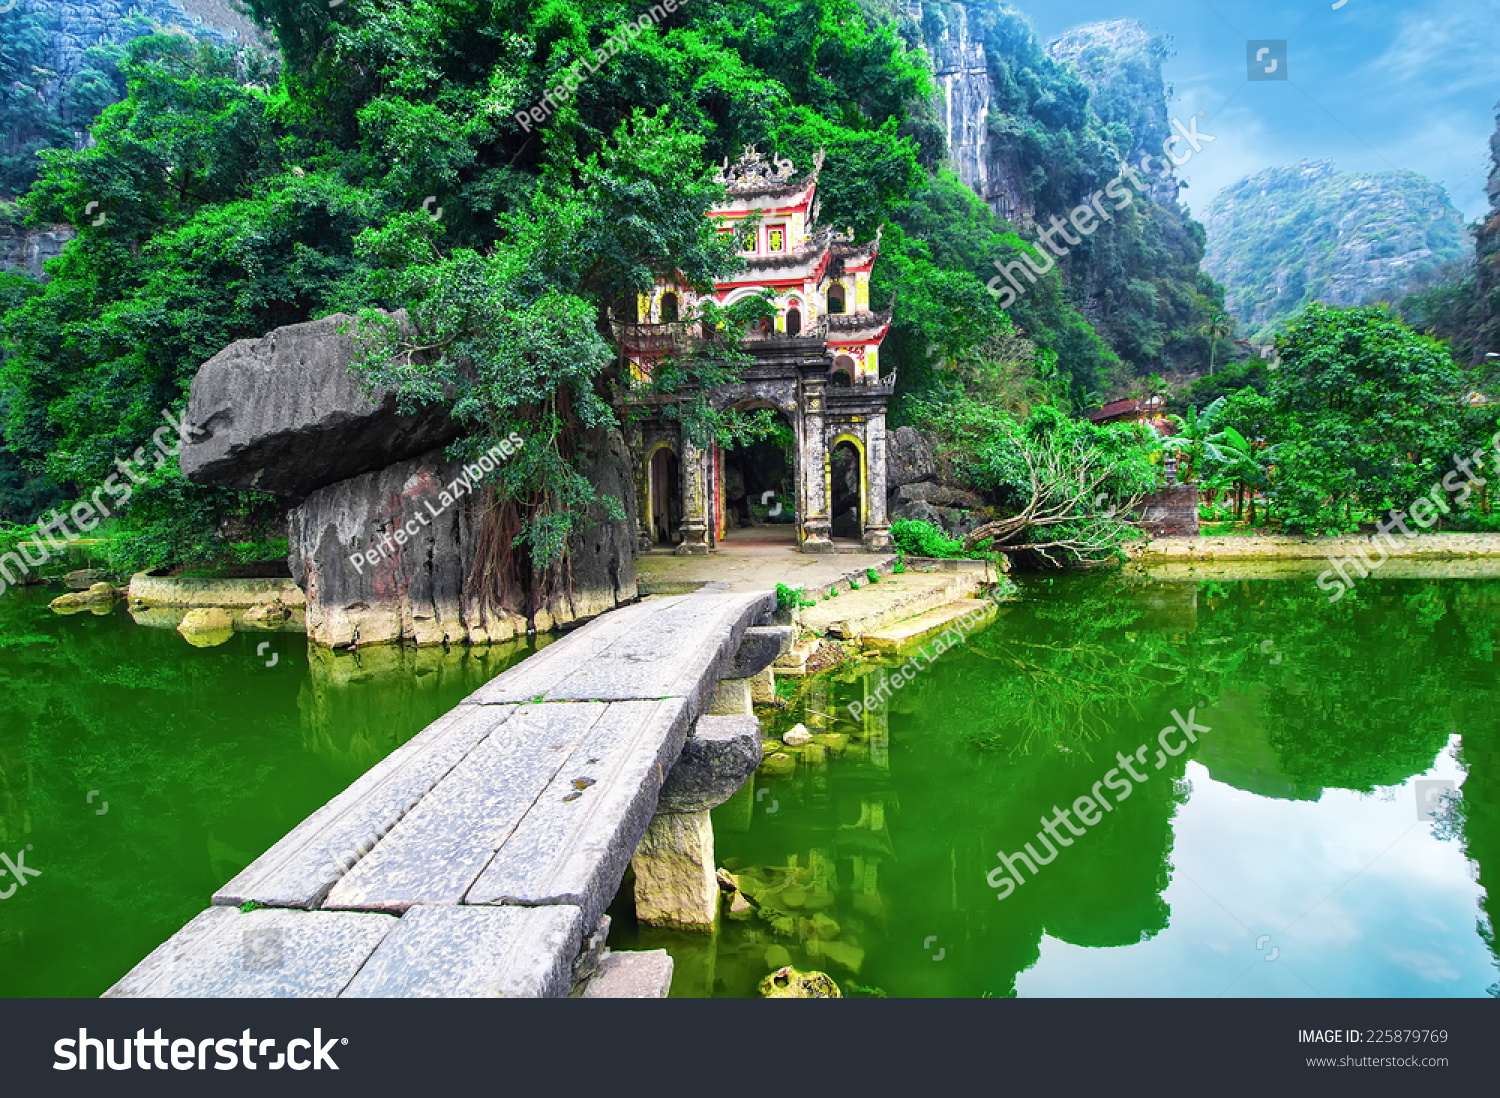 Outdoor park landscape with lake and stone bridge. Gate entrance to ancient Bich Dong pagoda complex. Ninh Binh, Vietnam travel destination #225879769